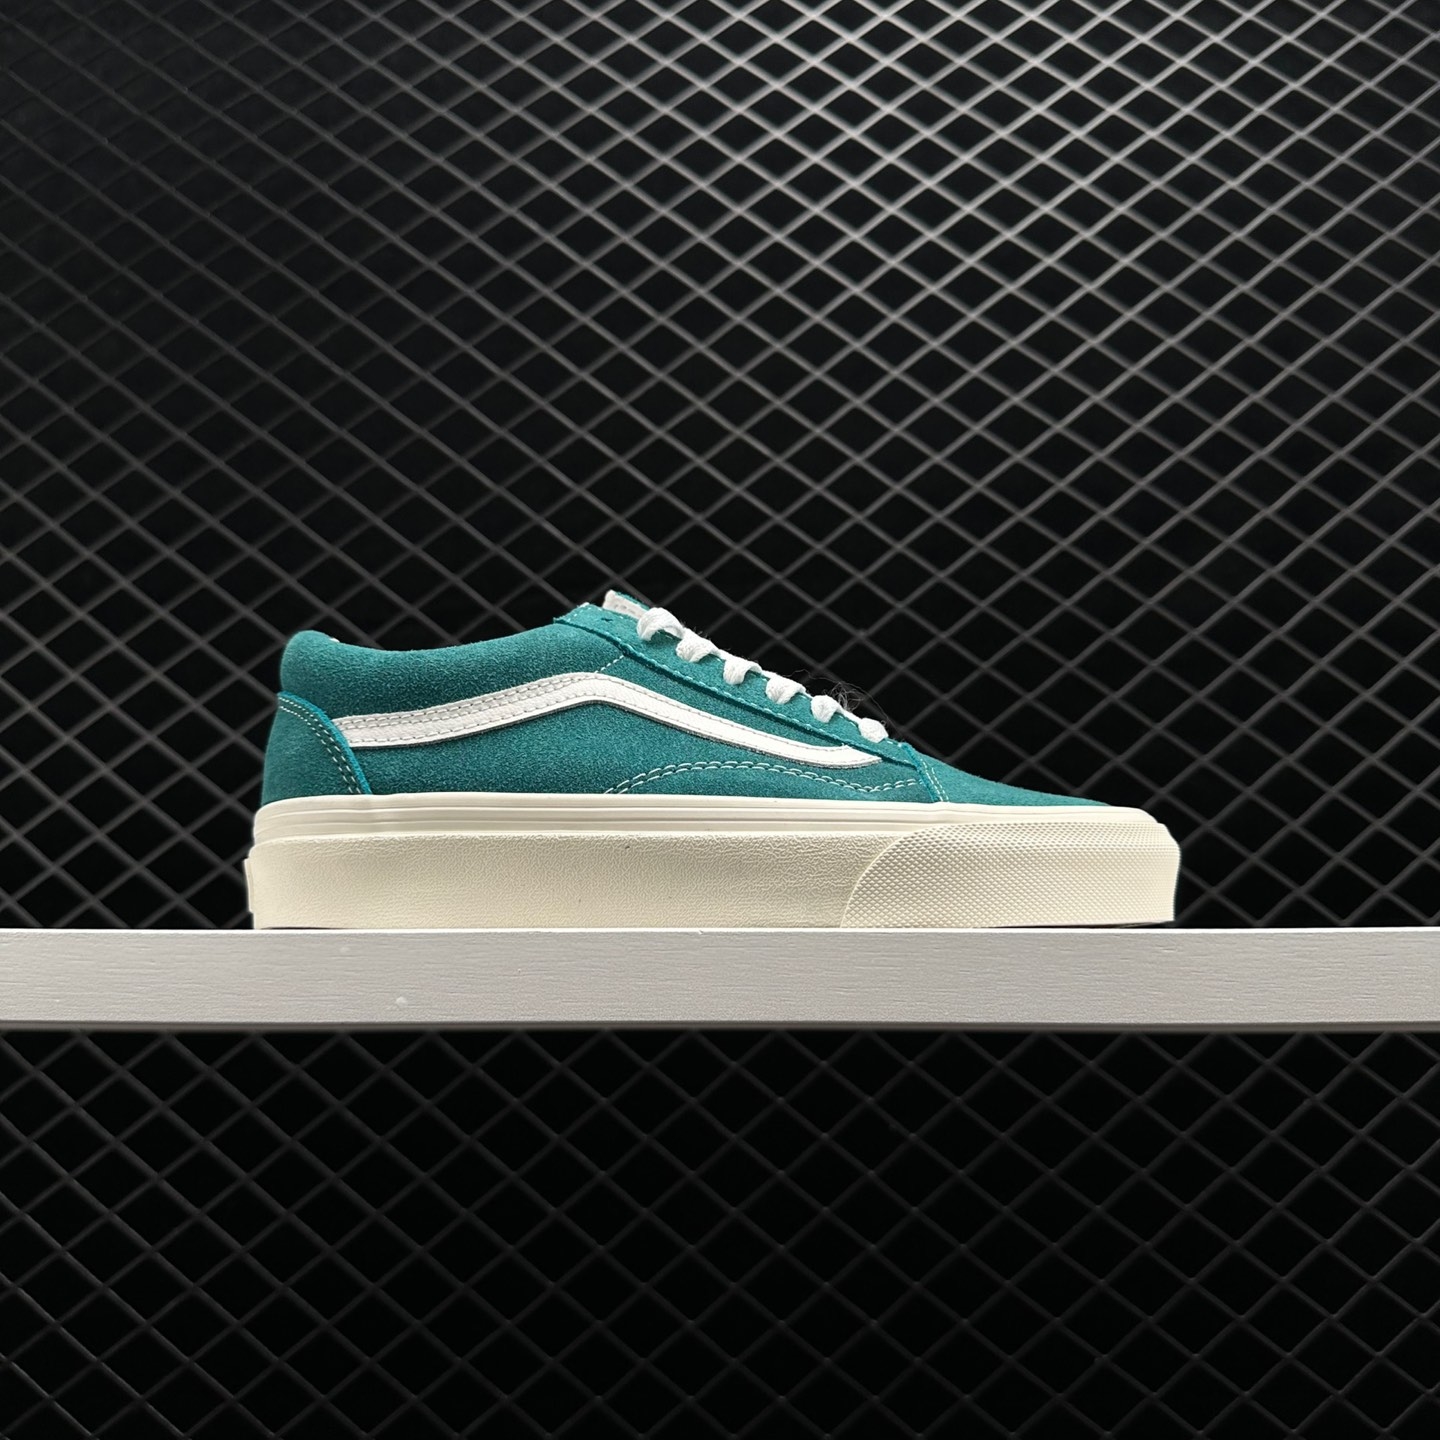 Vans Style 36 Retro Sport Green - Trendy Sneakers for a Retro Look